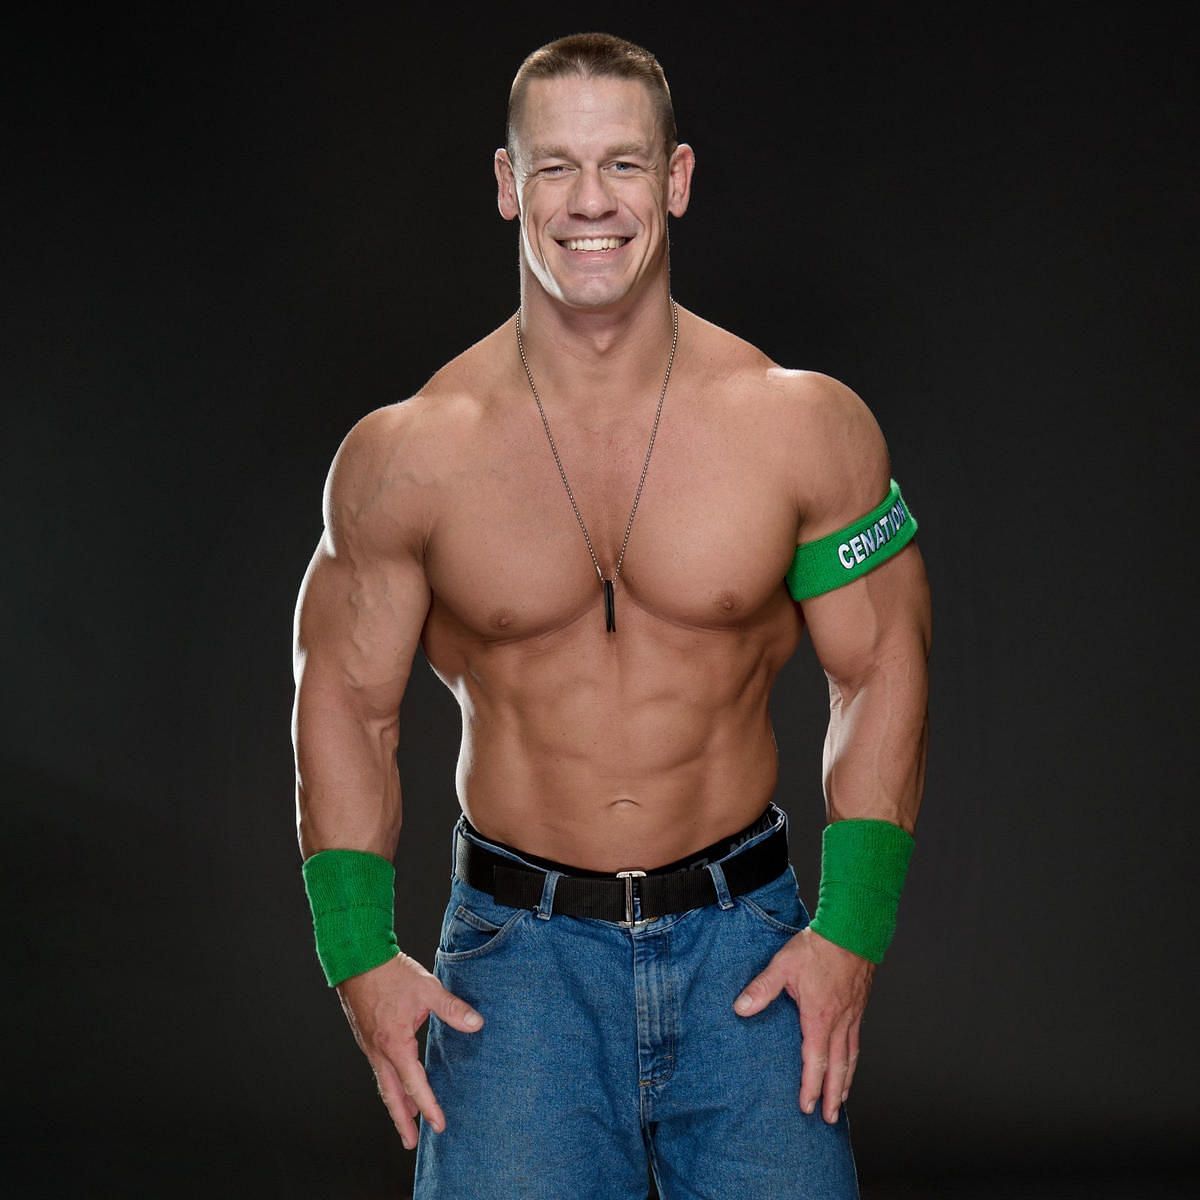 Incredible Compilation of Over 999 John Cena Images in Spectacular 4K Clarity